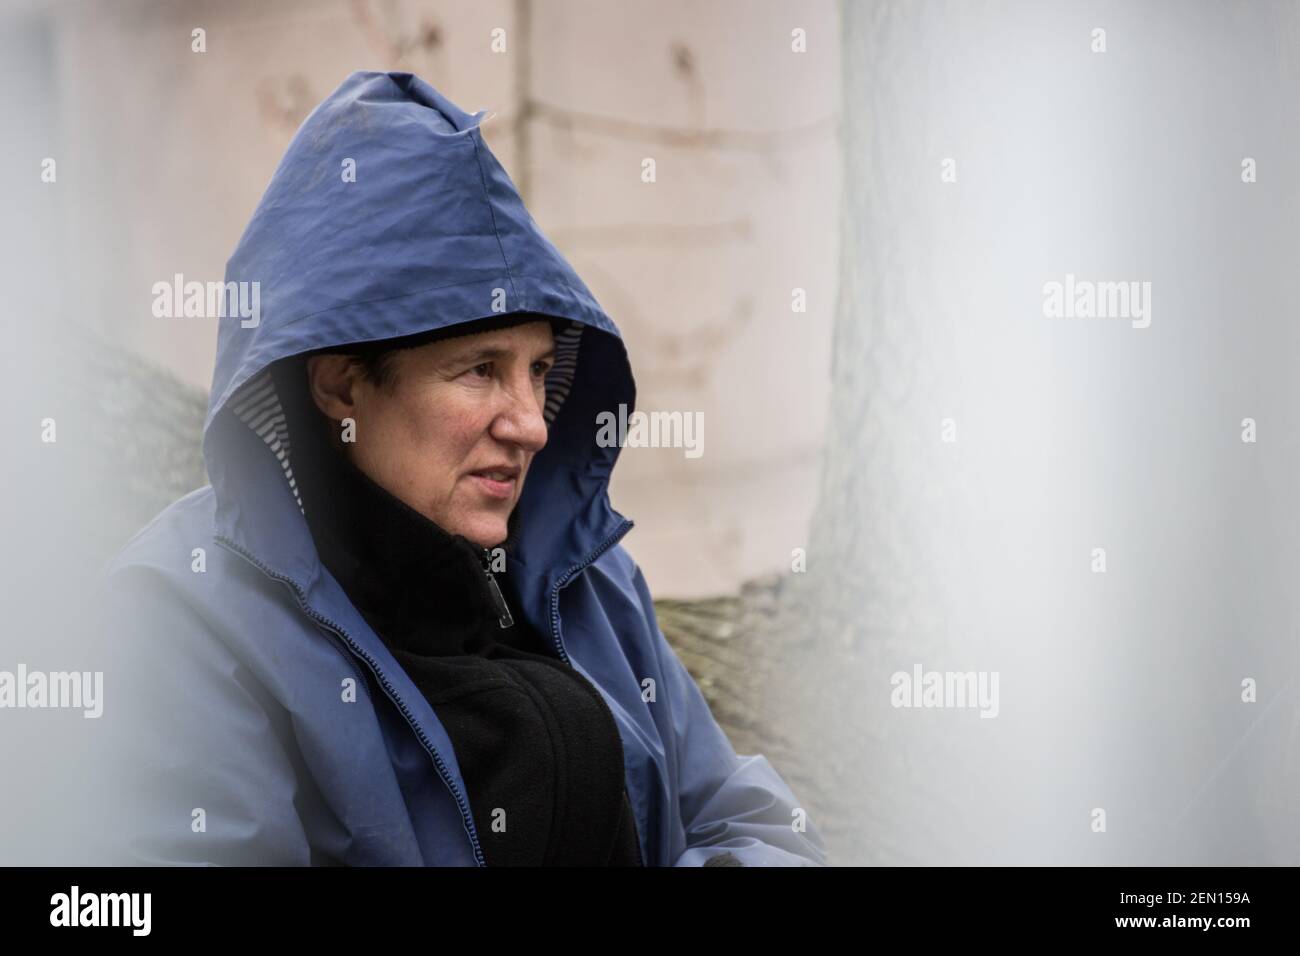 Wandsworth, London, UK; 22nd February, 2021: A portrait of the Tree Protector Maria Gallastegui, 62, after her first night on the tree. Maria is one of the three activists that have climbed a 100-year-old black poplar tree in York Gardens, Battersea, in a bid to save it from felling. The tree was due for cutting down to make way for a new electric cable, part of the local housing regeneration scheme. The tree protectors and their supporters believe the cable could have been diverted to spare the tree. The poplar tree, a Category A, high amenity value tree, can only be felled if there are compe Stock Photo